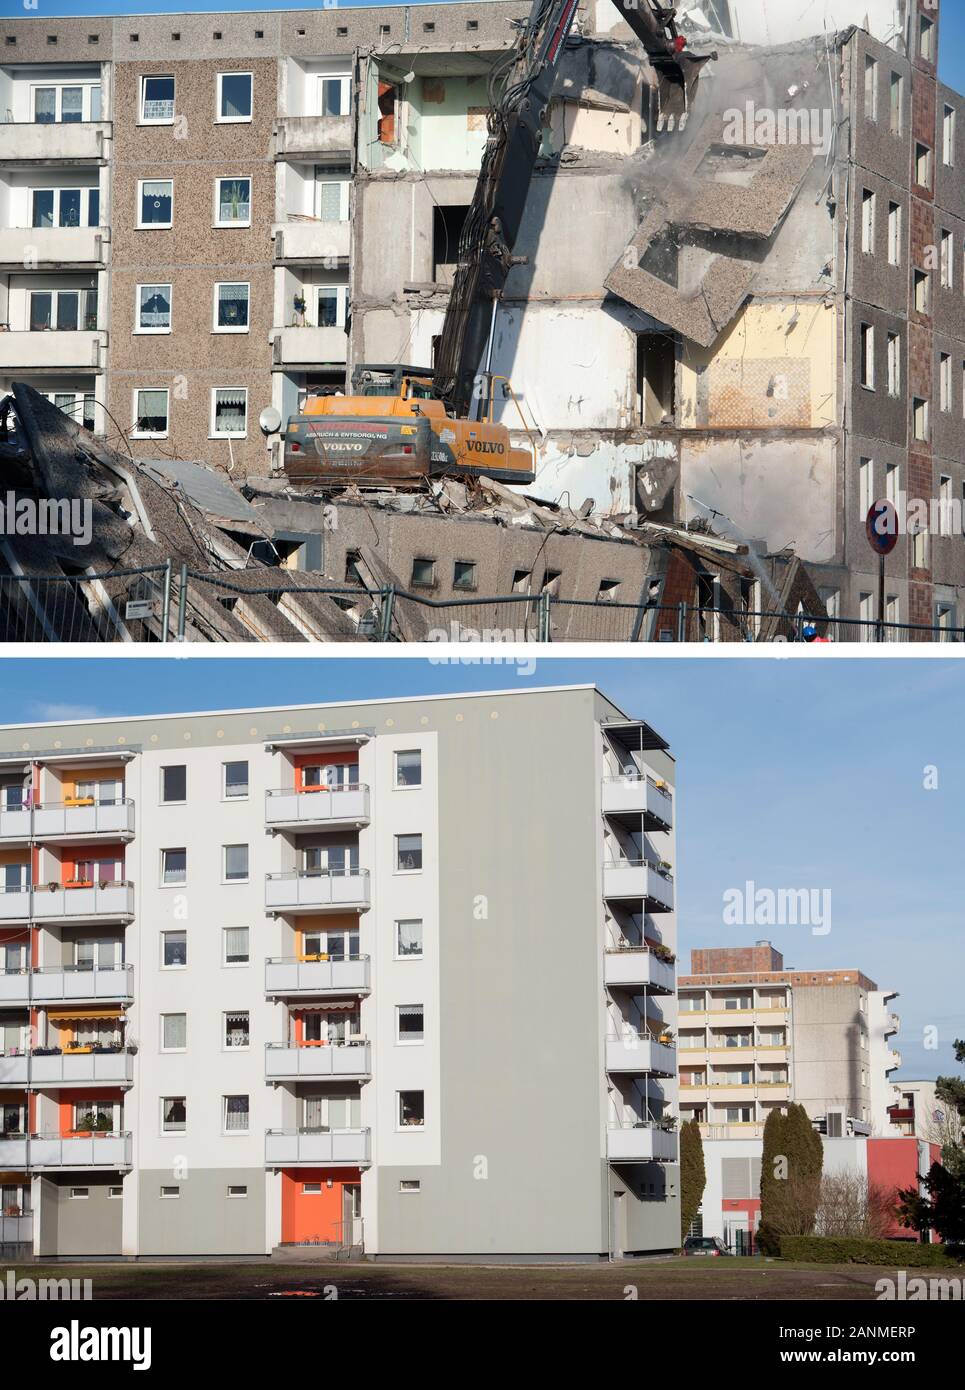 Stralsund, Germany. 17th Jan, 2020. KOMBO - On 28.11.2011, an excavator demolishes a panel building from GDR times in the Knieper West residential area of Stralsund. The block behind it has been redeveloped today (photo below) for 'dpa survey: Stadtumbau Ost - Where do we stand 30 years after reunification? Credit: Stefan Sauer/dpa-Zentralbild/ZB/dpa/Alamy Live News Stock Photo